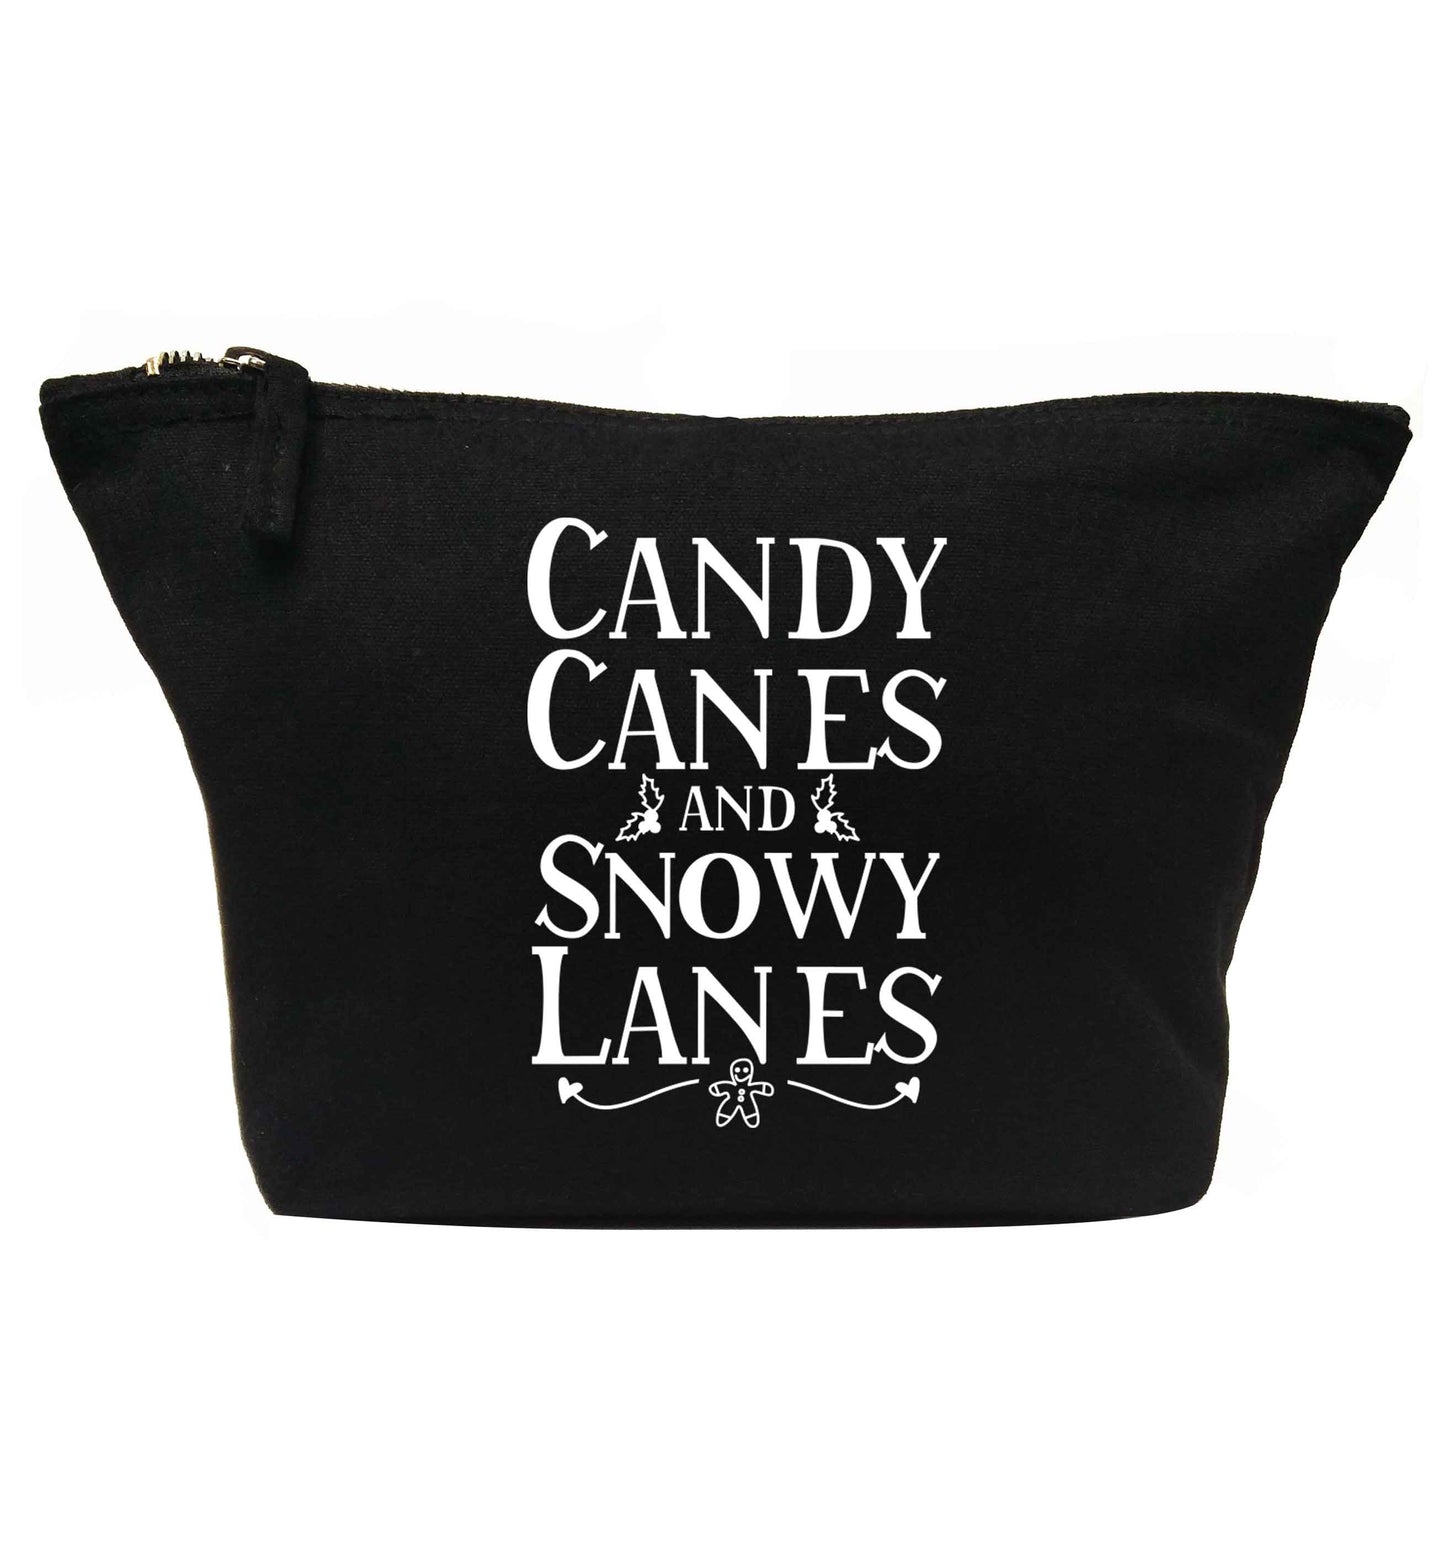 Candy canes and snowy lanes | makeup / wash bag